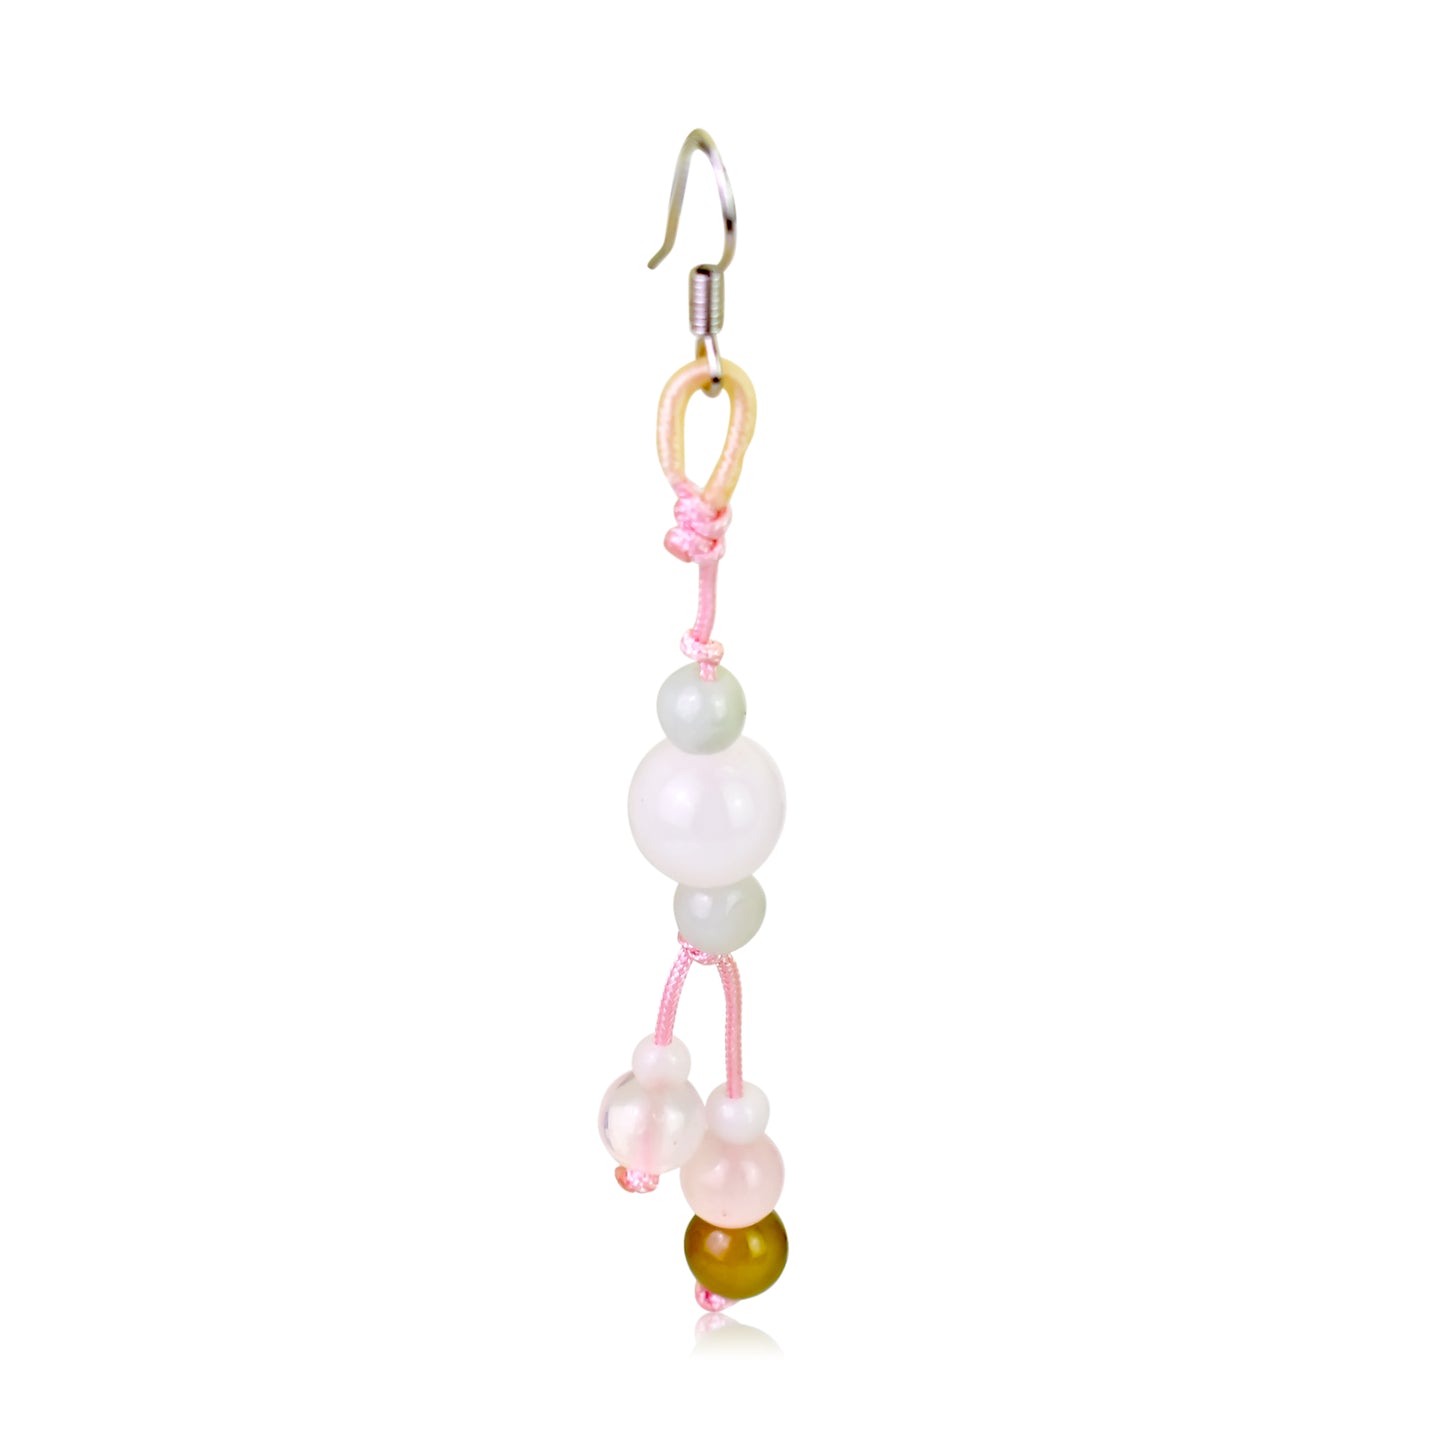 Add a Splash of Color with Irresistible Rose Quartz Beads Earrings made with Pink Cord